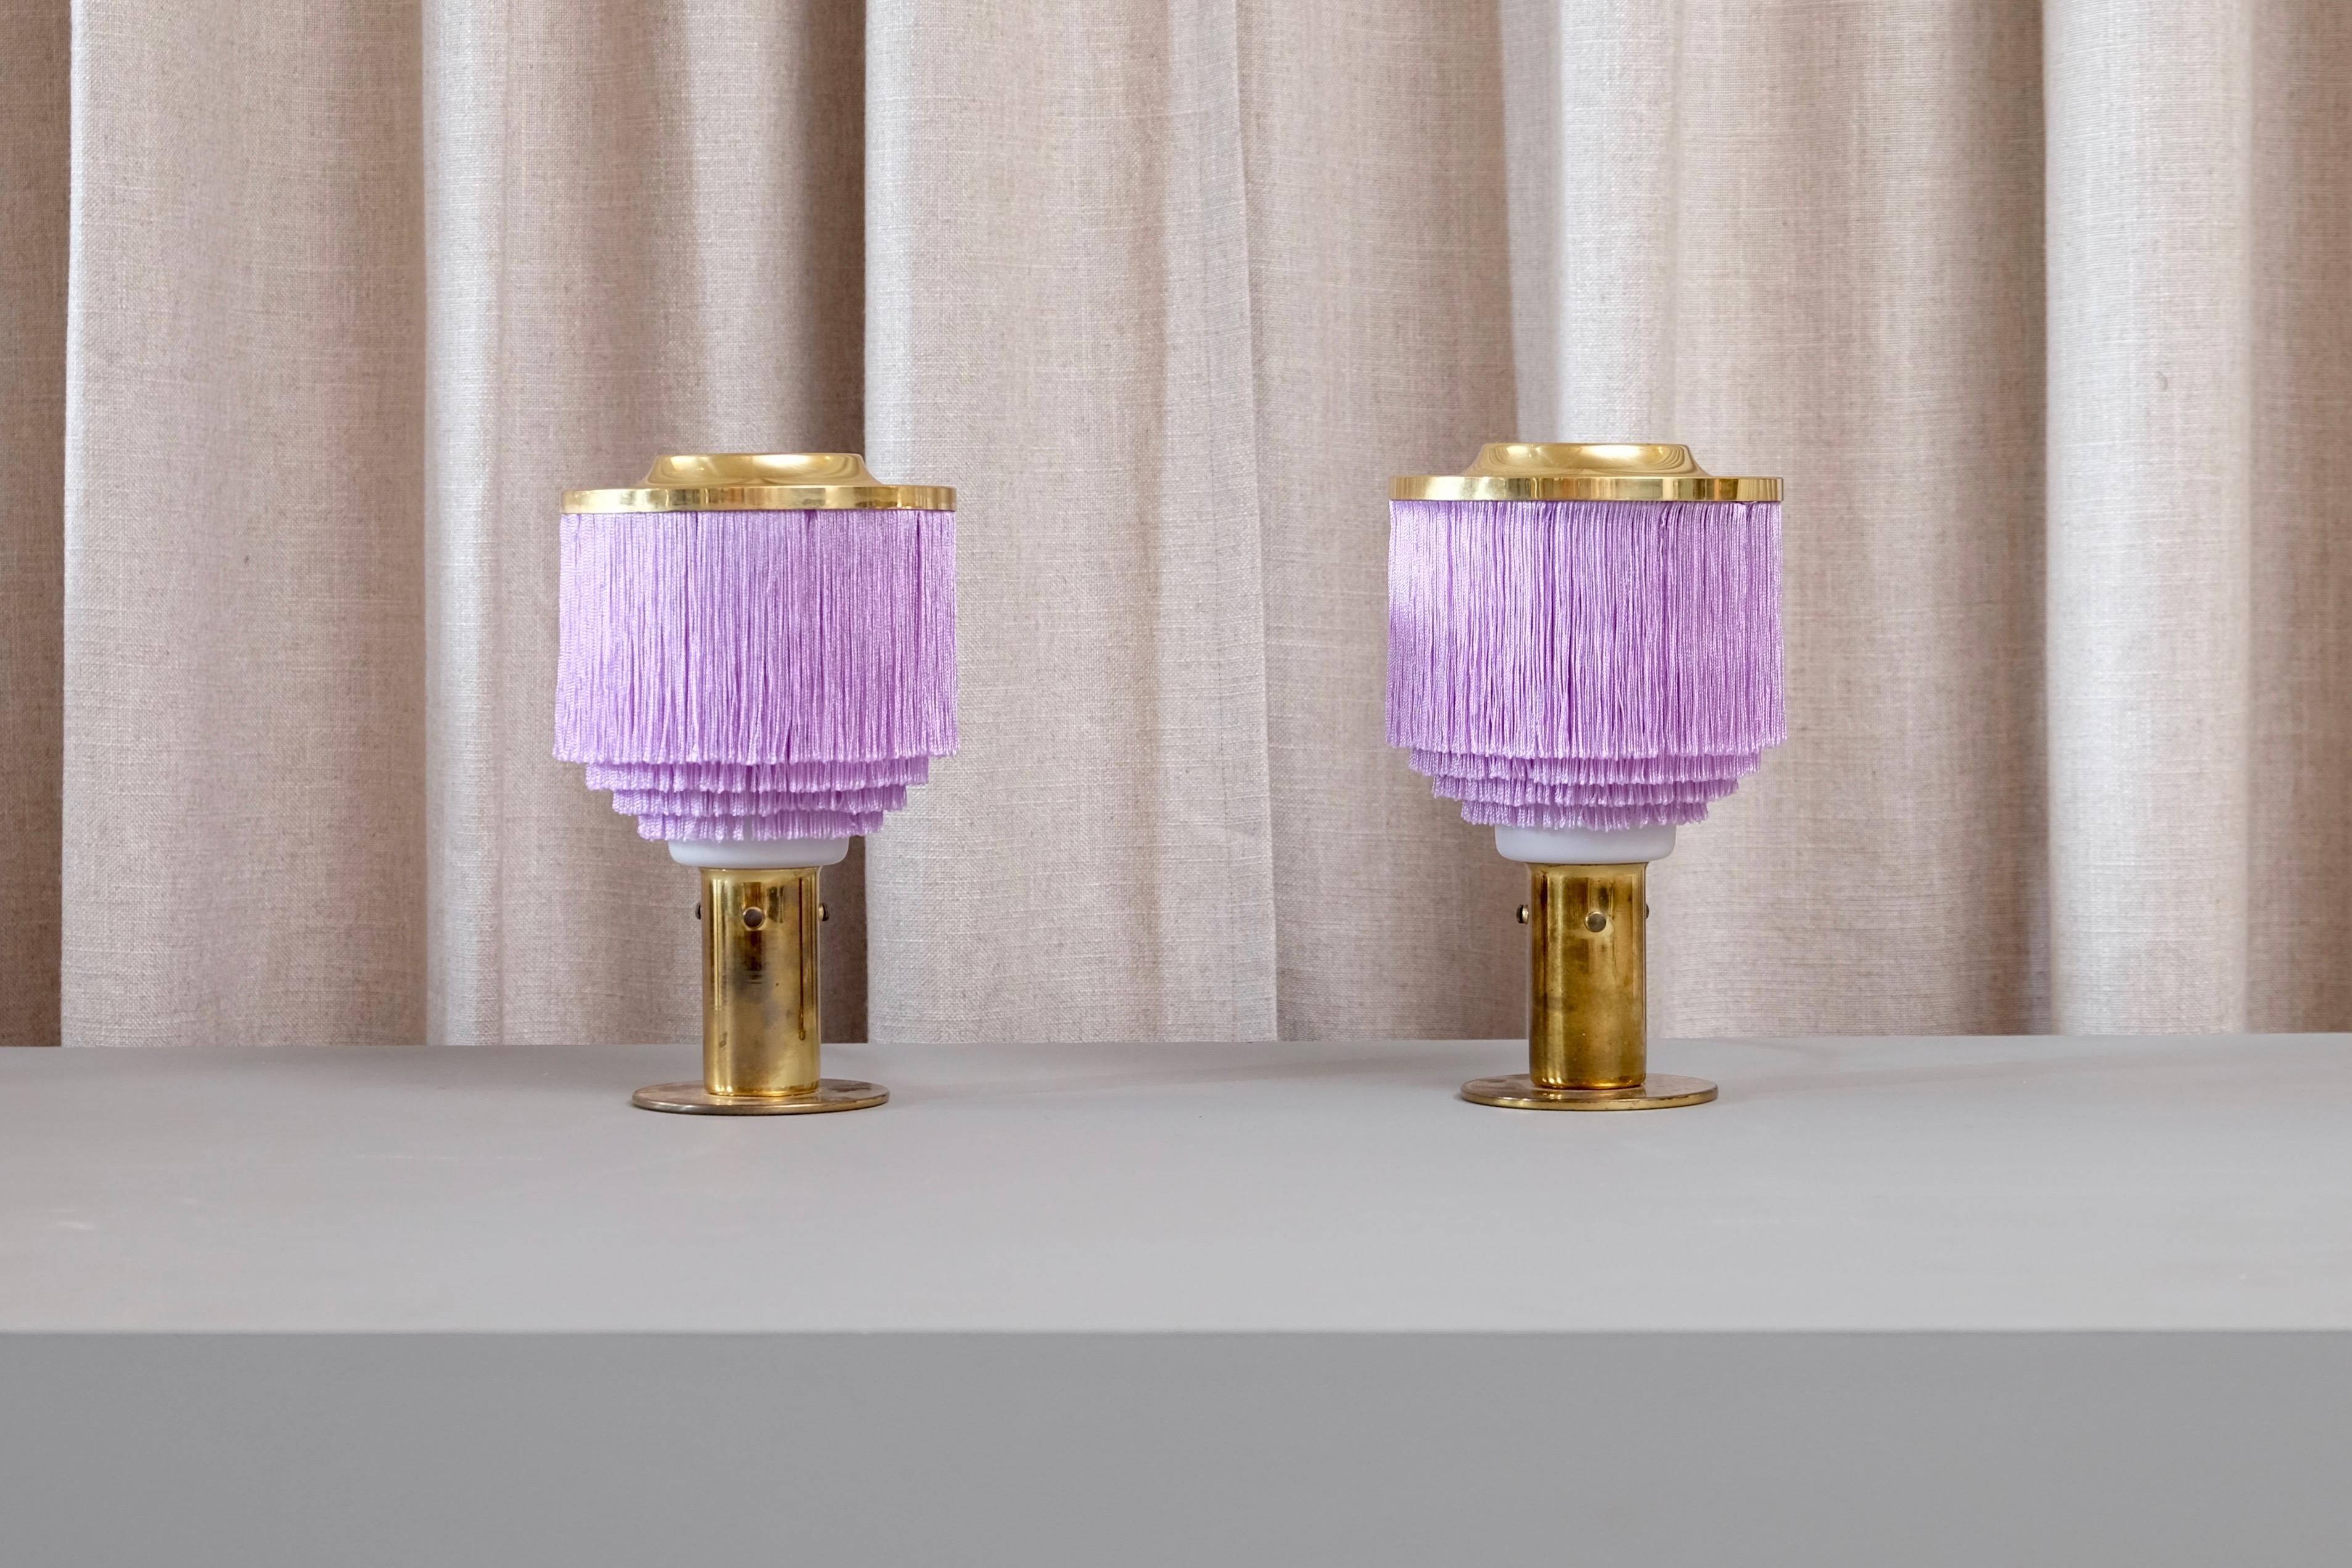 Purple/pink fringes and opaline glass.
Produced by Hans-Agne Jakobsson, Markaryd, 1960s.